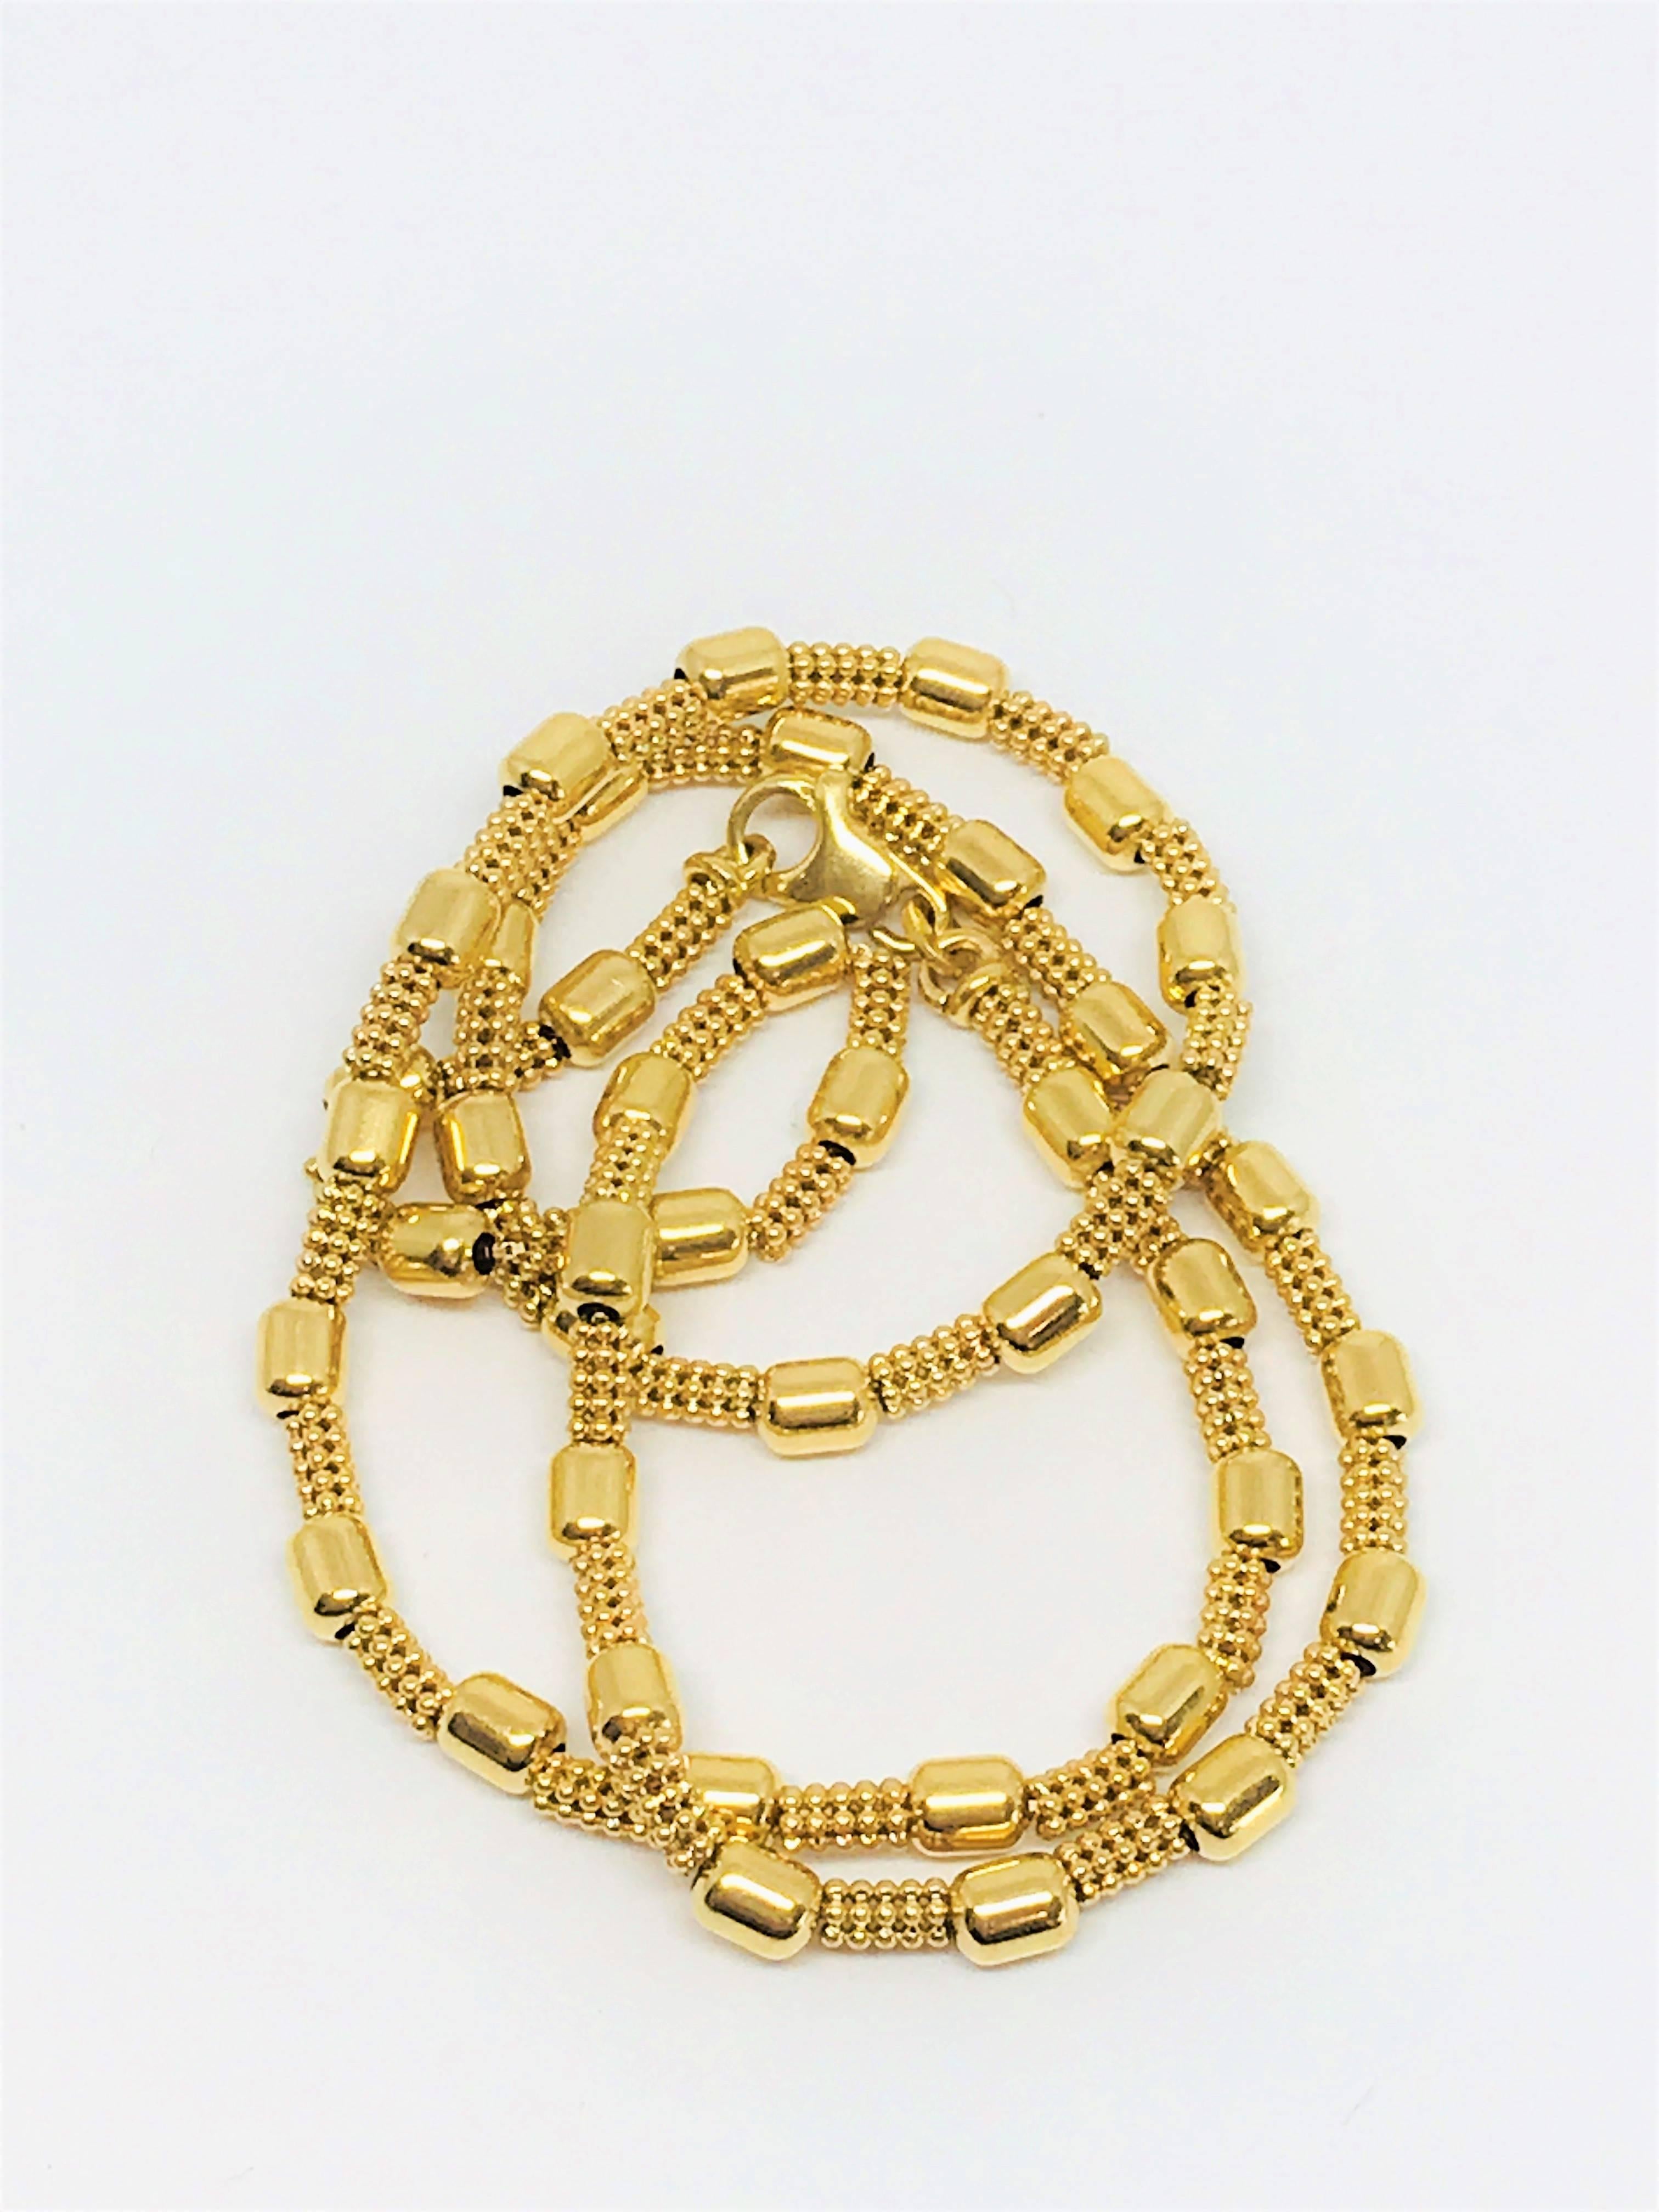 18 Karat Yellow Gold Fancy Bead Chain Necklace In Excellent Condition For Sale In Kent, CT